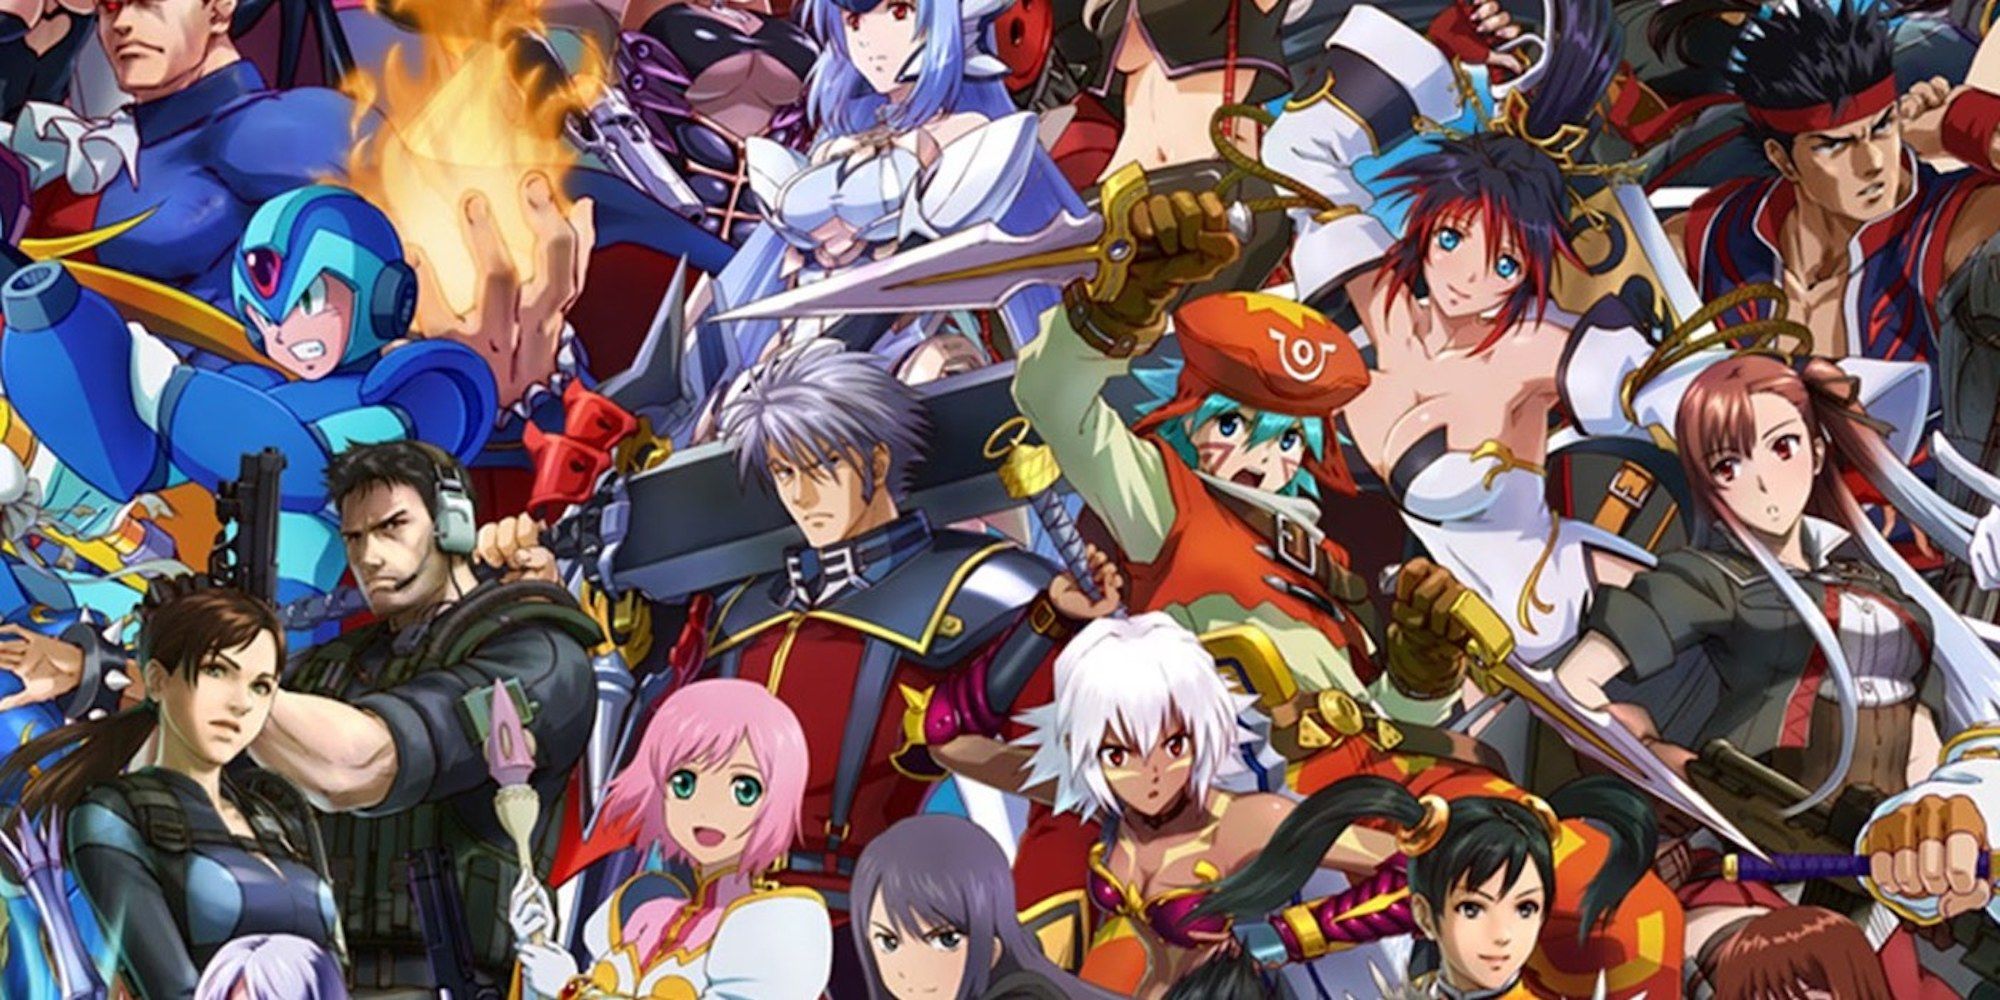 Promo art featuring characters in Project X Zone